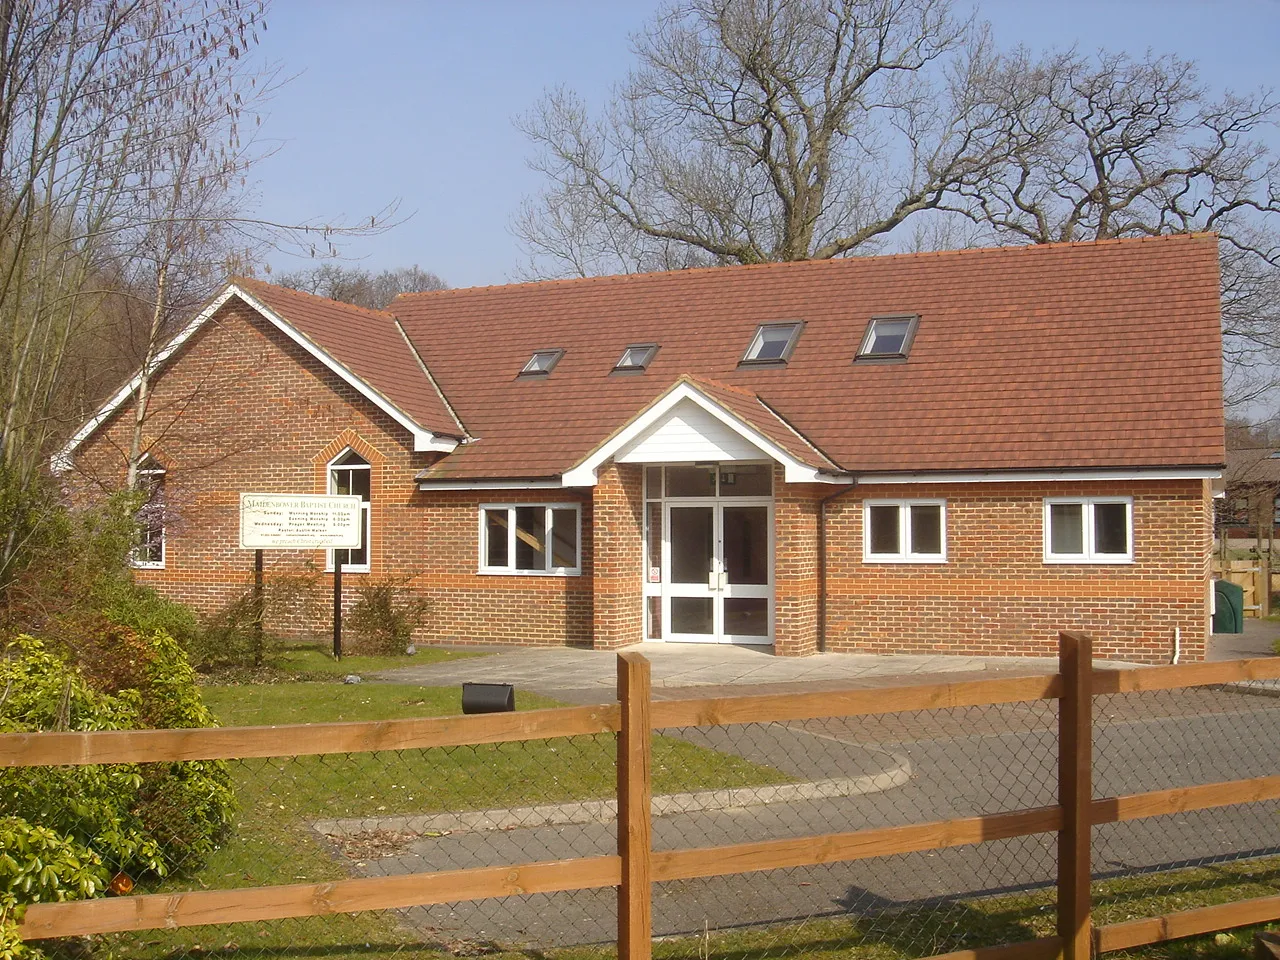 Photo showing: Maidenbower Baptist Church, Maidenbower, Crawley, England.  Opened in 2001 in the New Town of Crawley's newest neighbourhood.